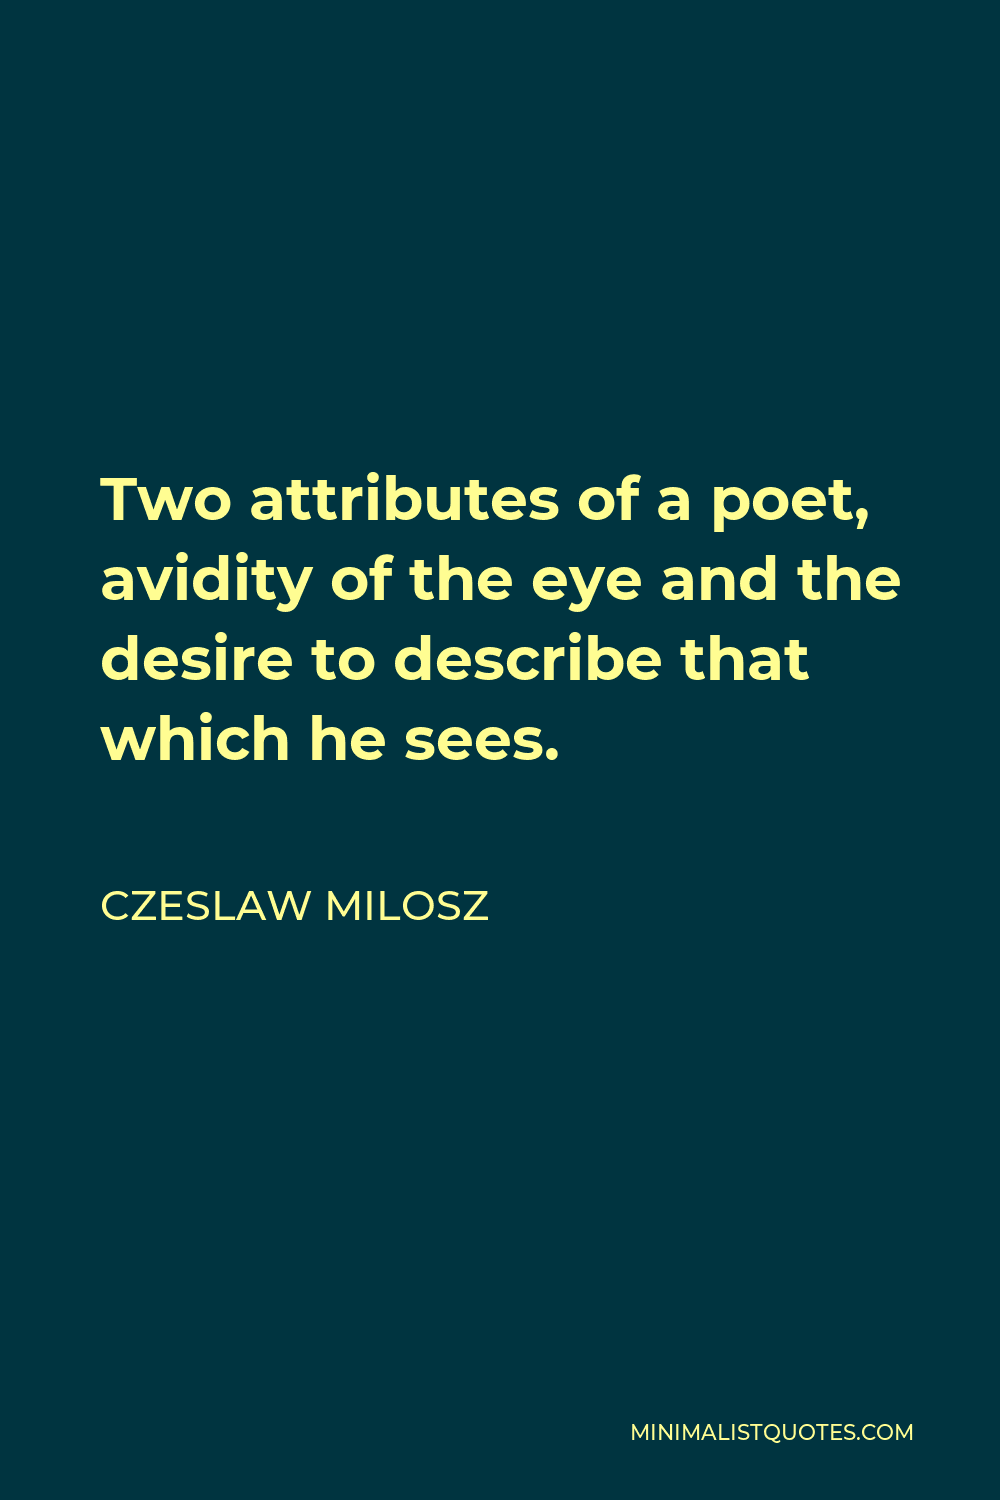 Czeslaw Milosz Quote - Two attributes of a poet, avidity of the eye and the desire to describe that which he sees.